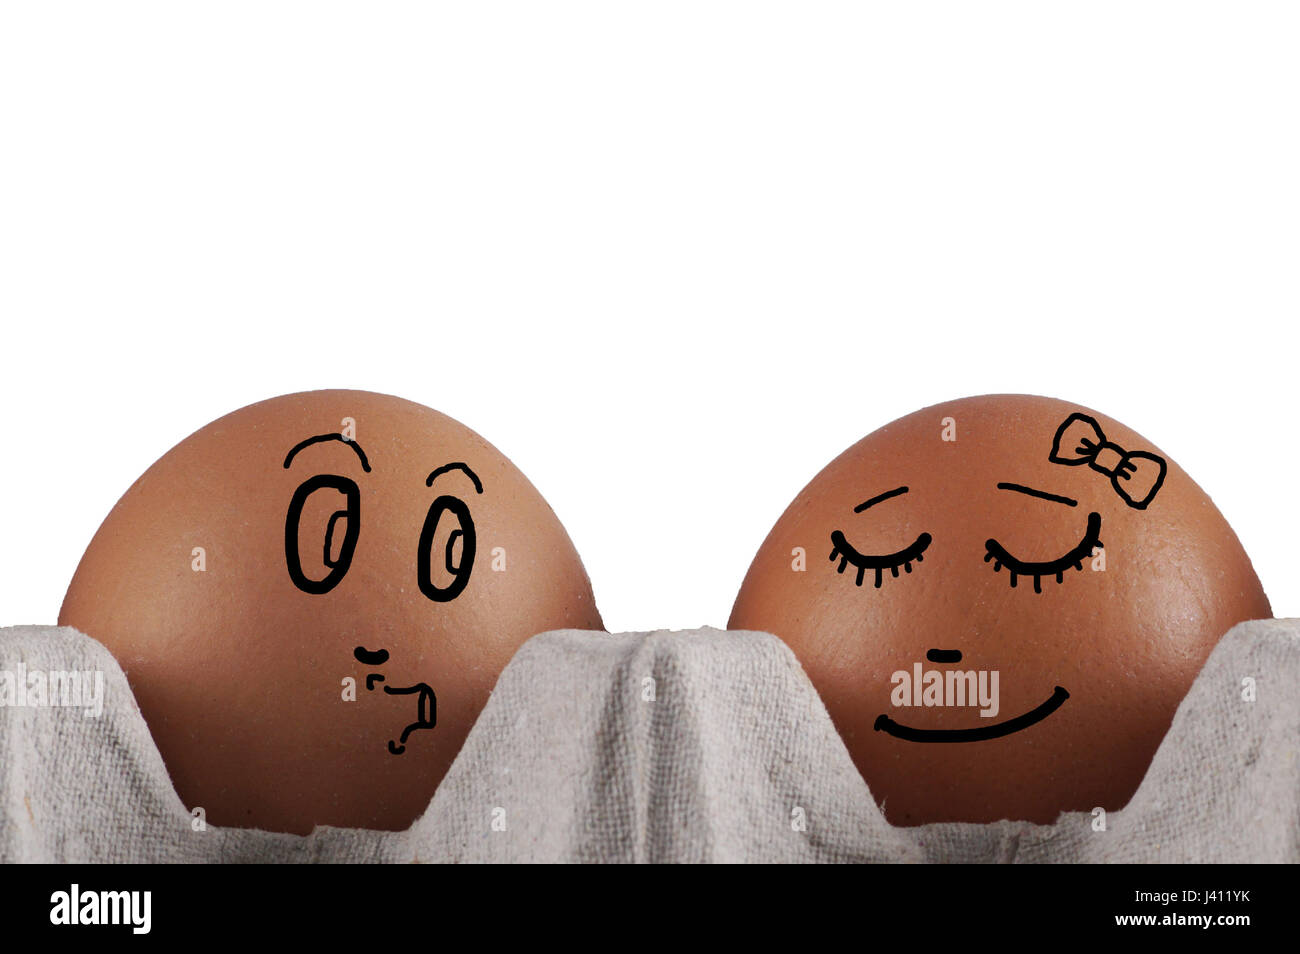 Calm and Excitement Expression style with egg characters Stock Photo